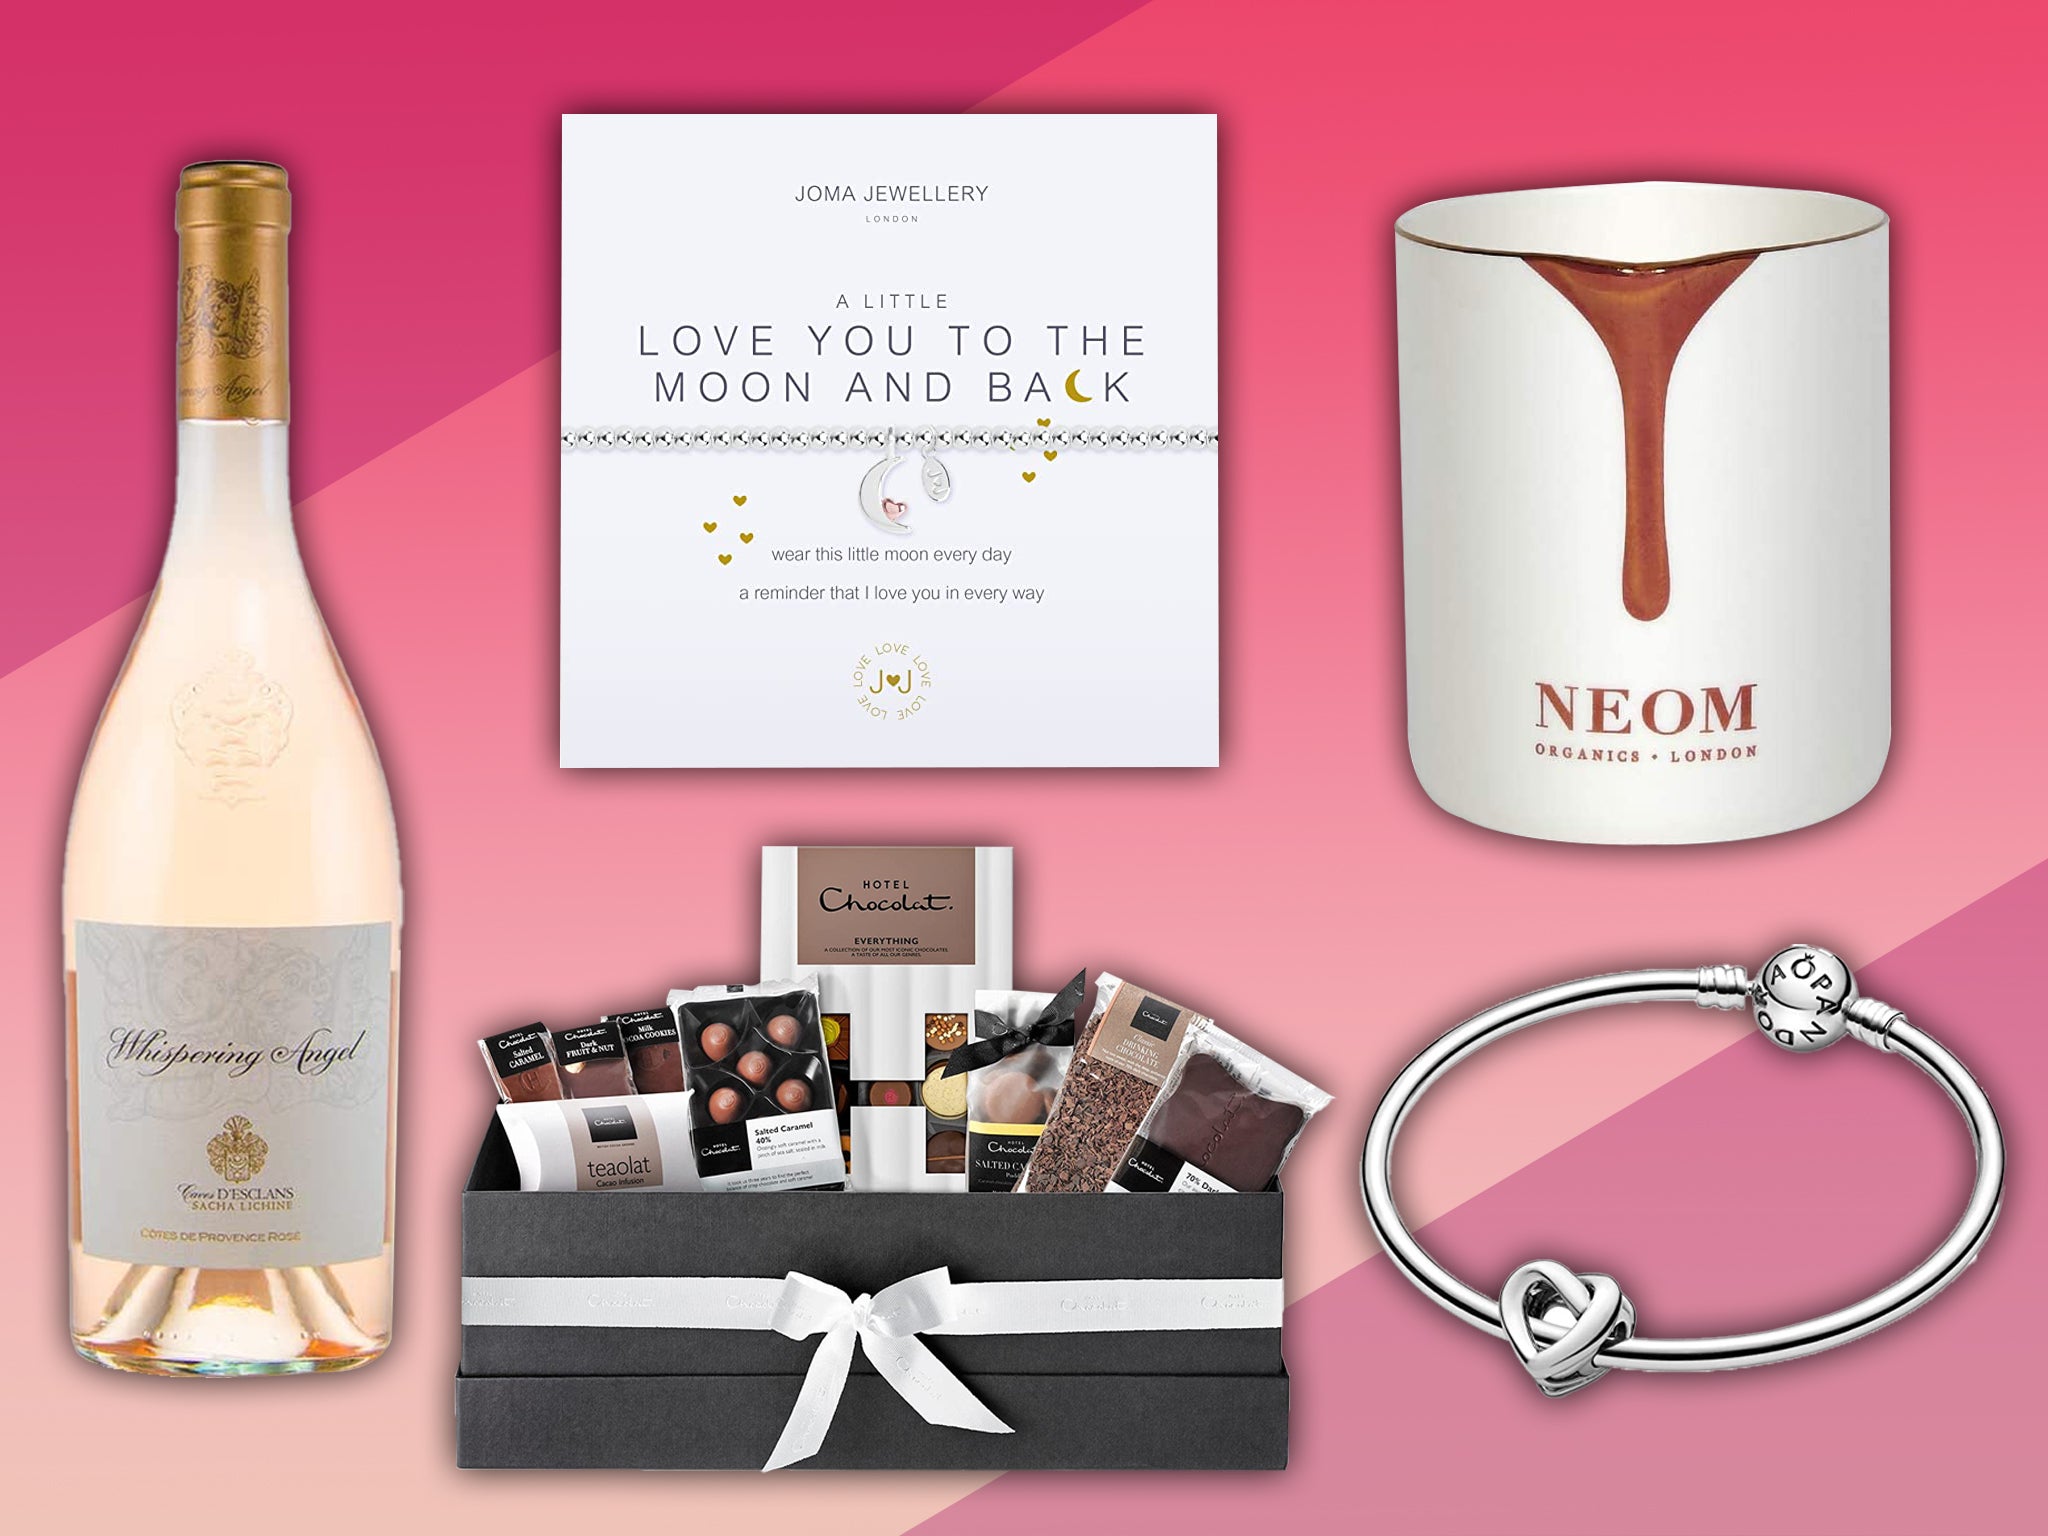 Quick cupid: Last-minute valentine's gifts that say 'I Love You'